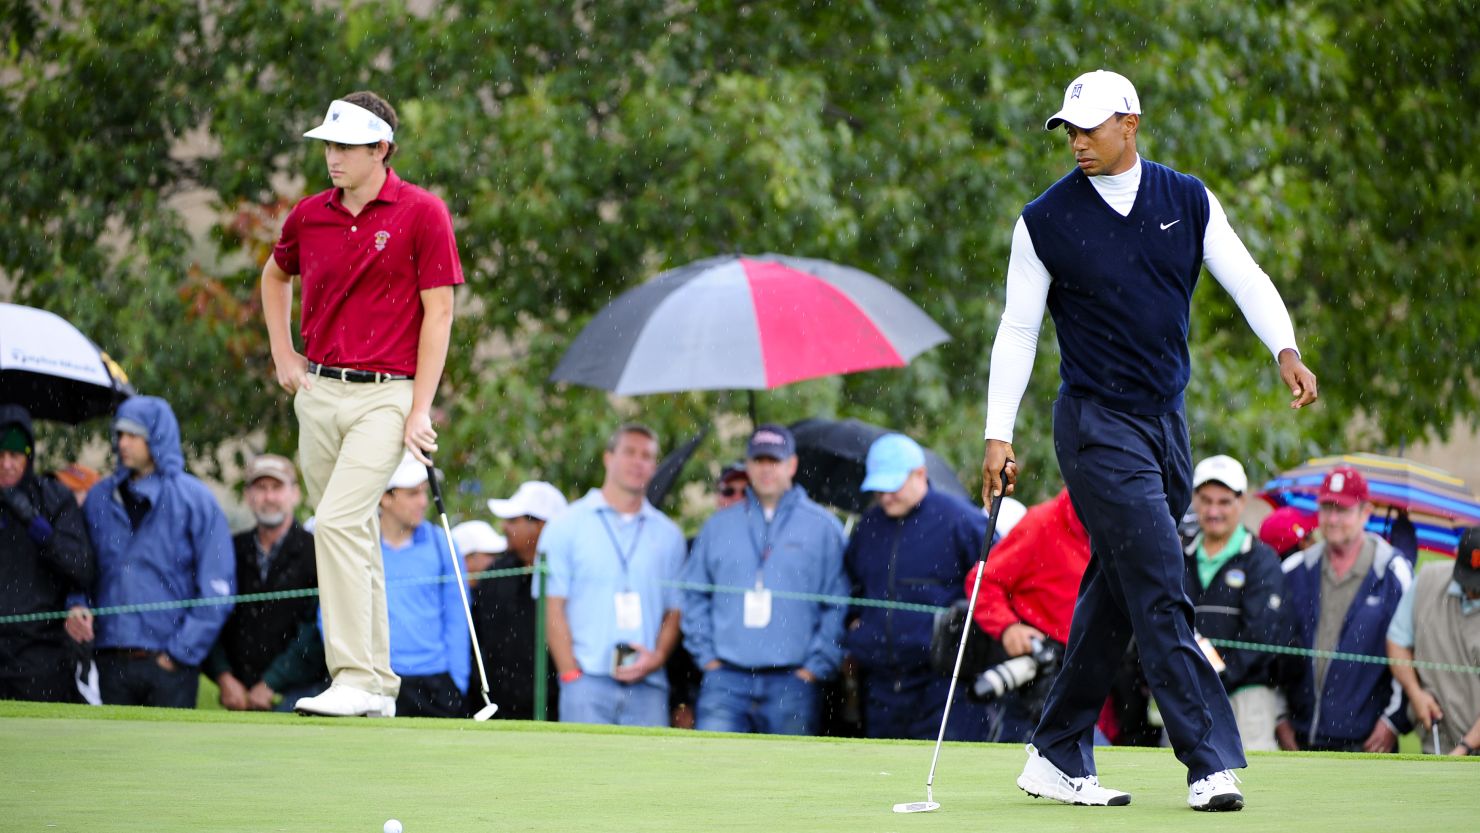 Contrasting fortunes: Tiger Woods (right) was in awful form, while Patrick Cantlay played an impressive opening round.